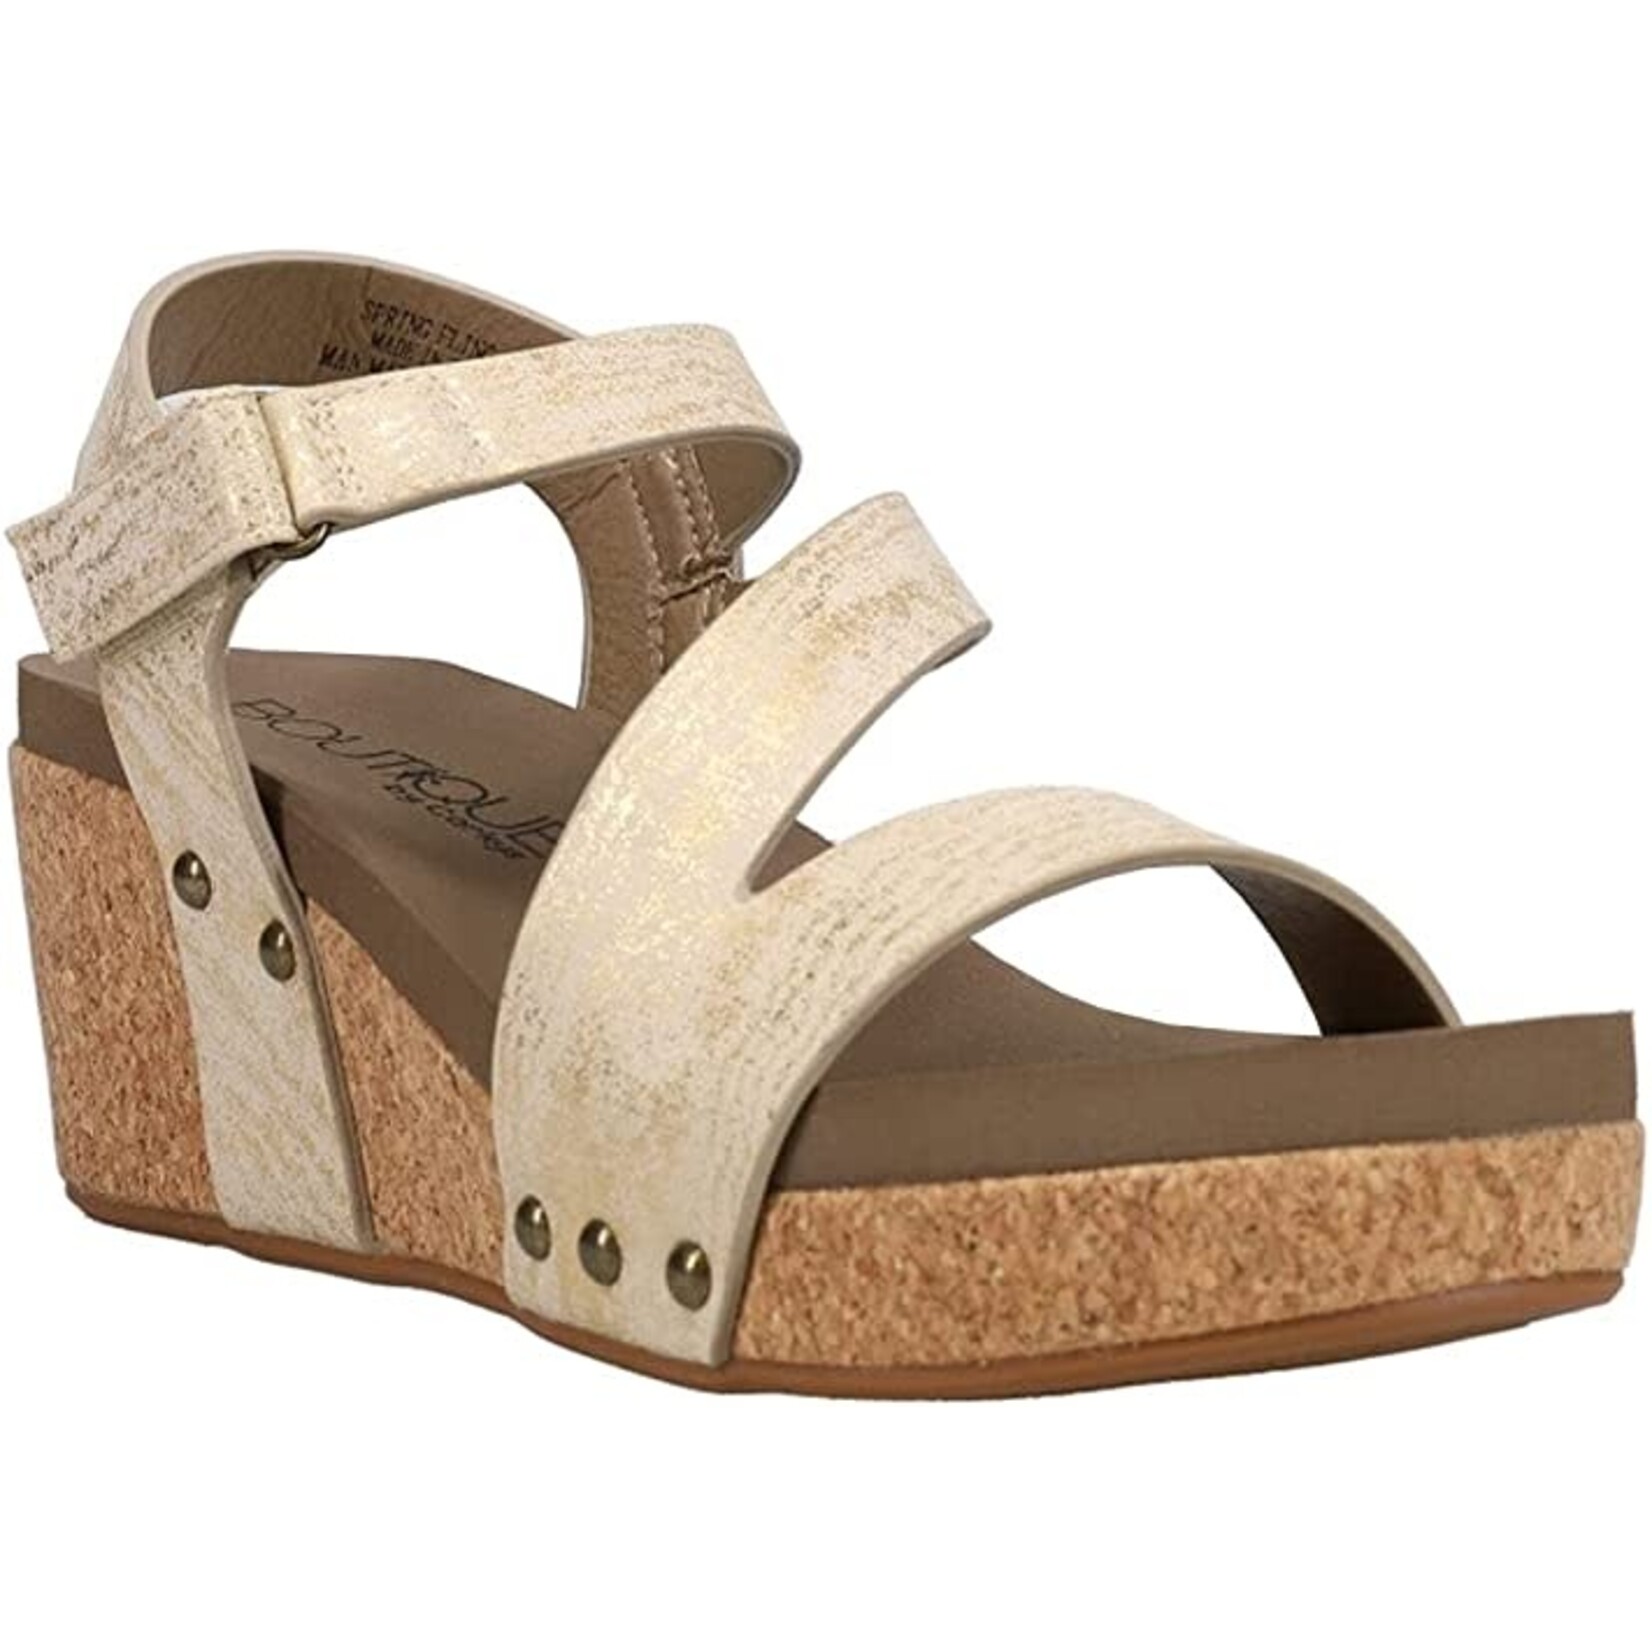 Corkys Corky's Spring Fling Wedge